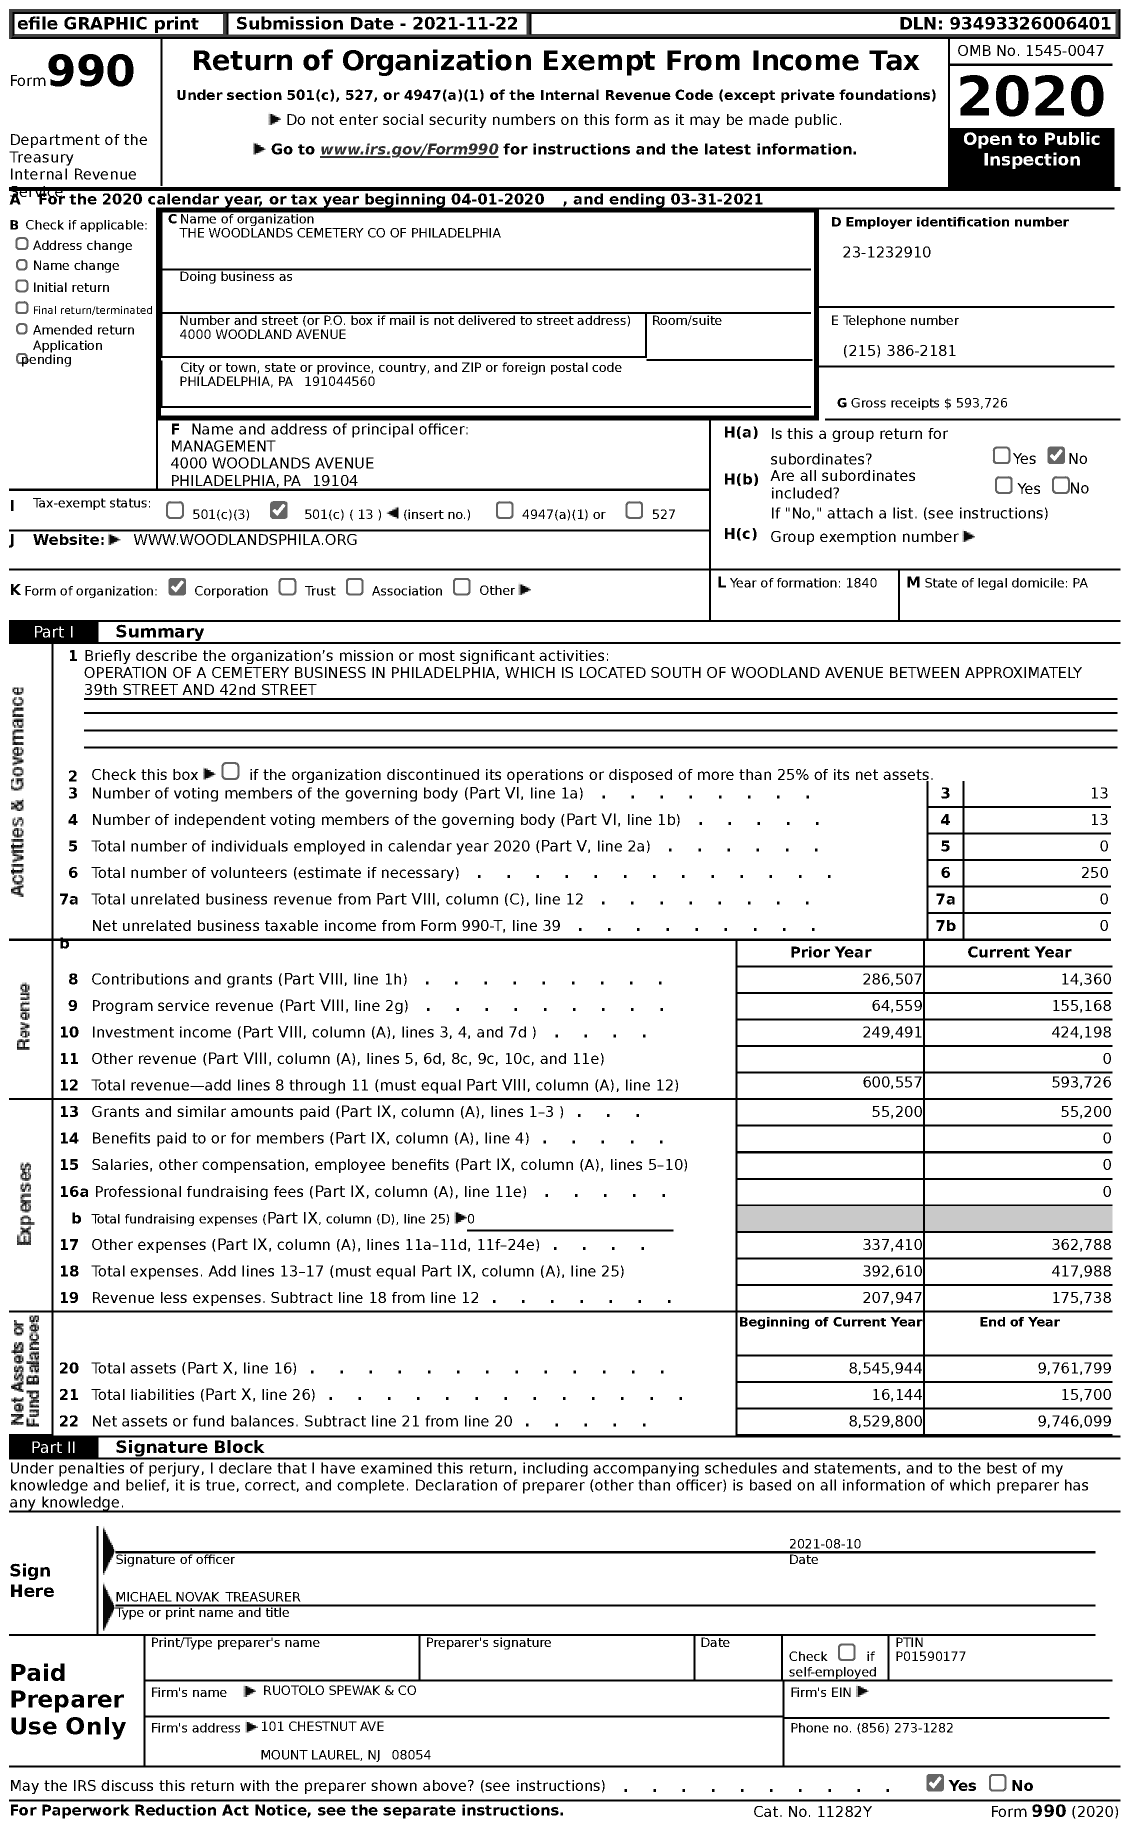 Image of first page of 2020 Form 990 for The Woodlands Cemetery of Philadelphia